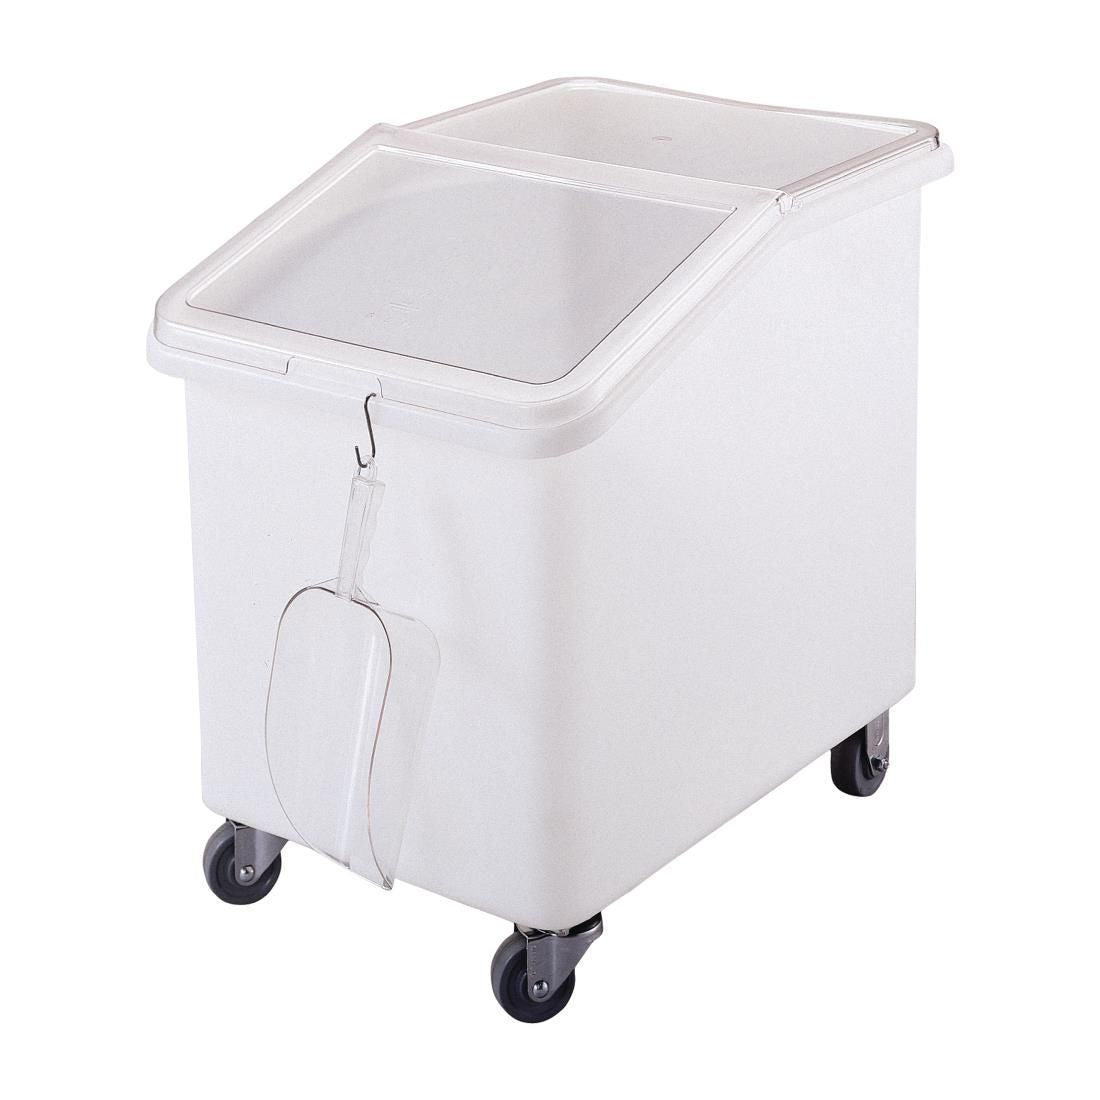 DB127 Cambro Mobile Ingredient Bin White 140Ltr JD Catering Equipment Solutions Ltd